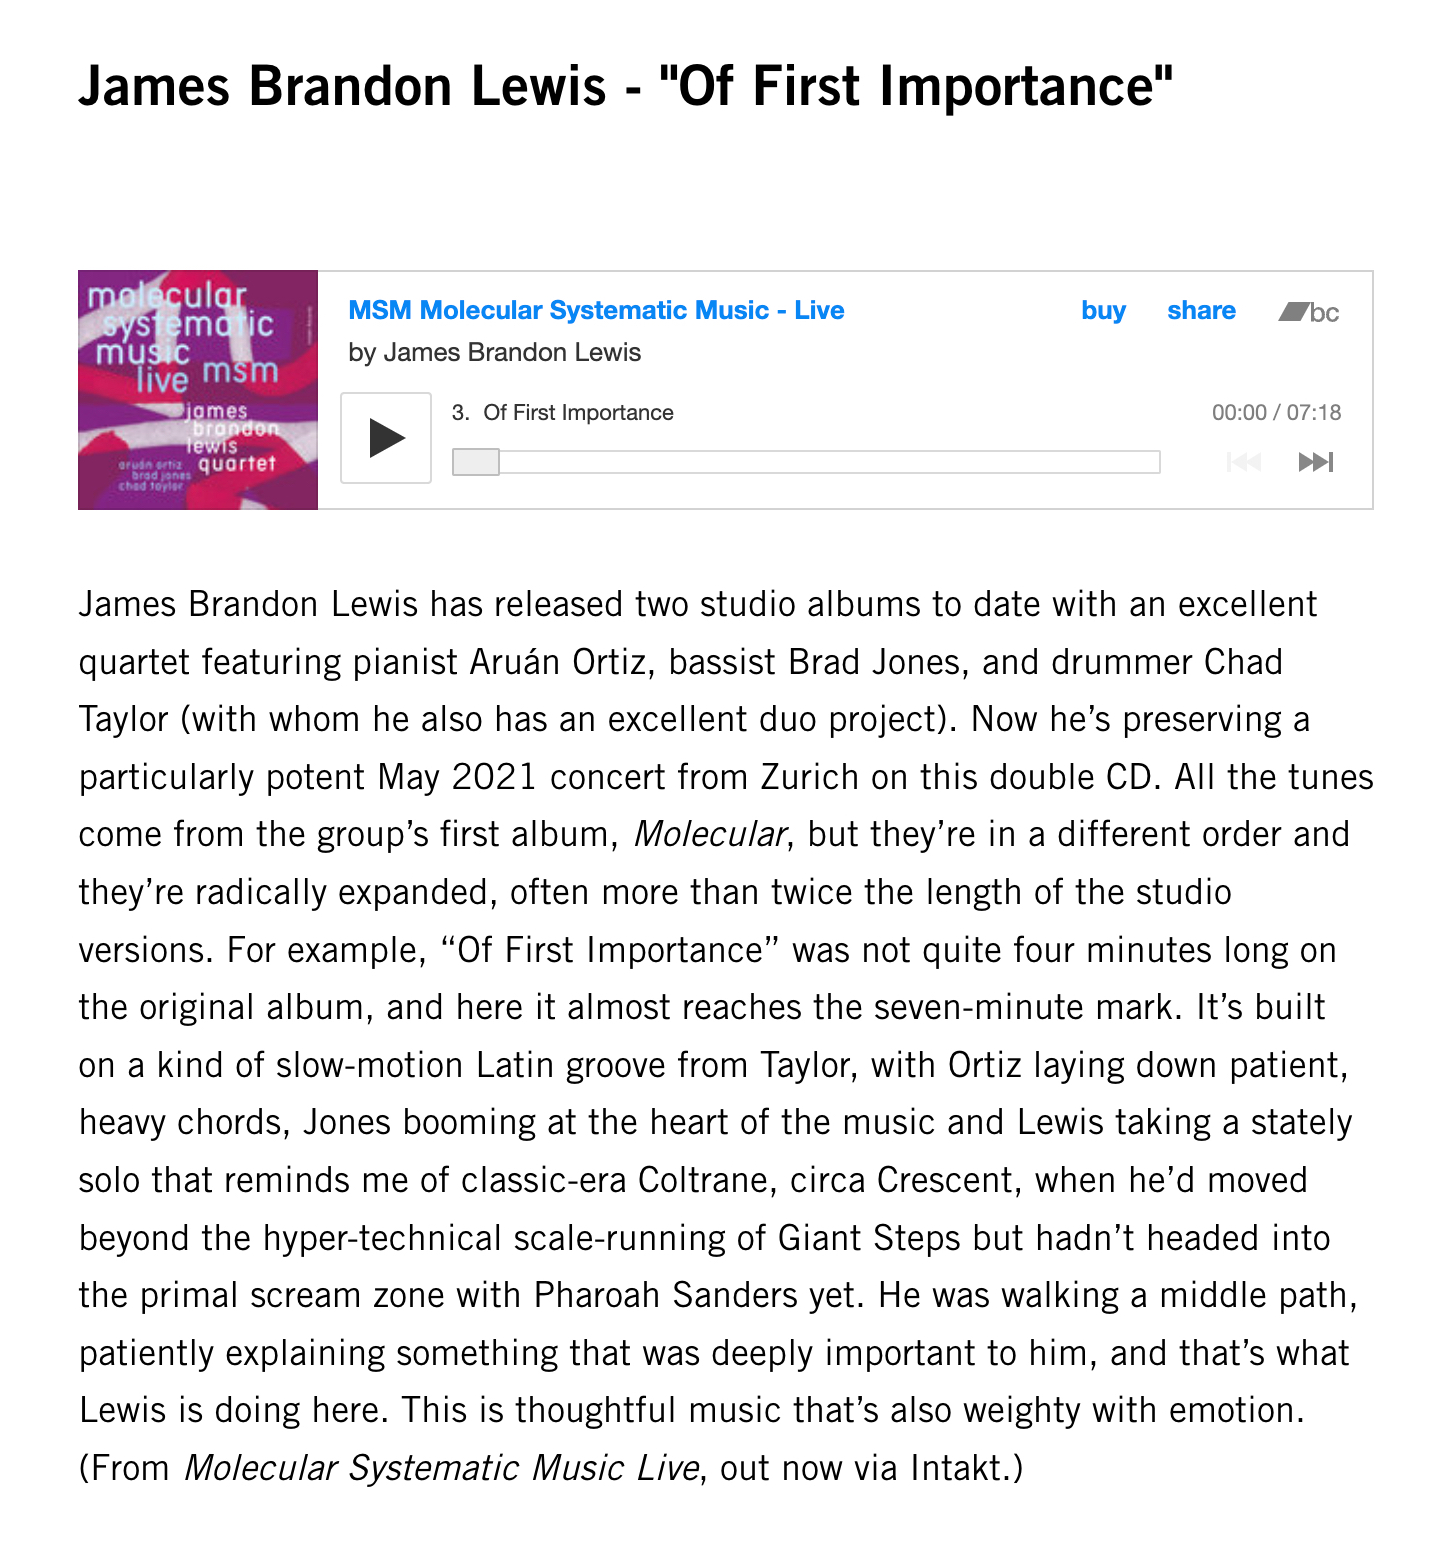 James Brandon Lewis has released two studio albums to date with an excellent quartet featuring pianist Aruán Ortiz, bassist Brad Jones, and drummer Chad Taylor (with whom he also has an excellent duo project). Now he’s preserving a particularly potent May 2021 concert from Zurich on this double CD.